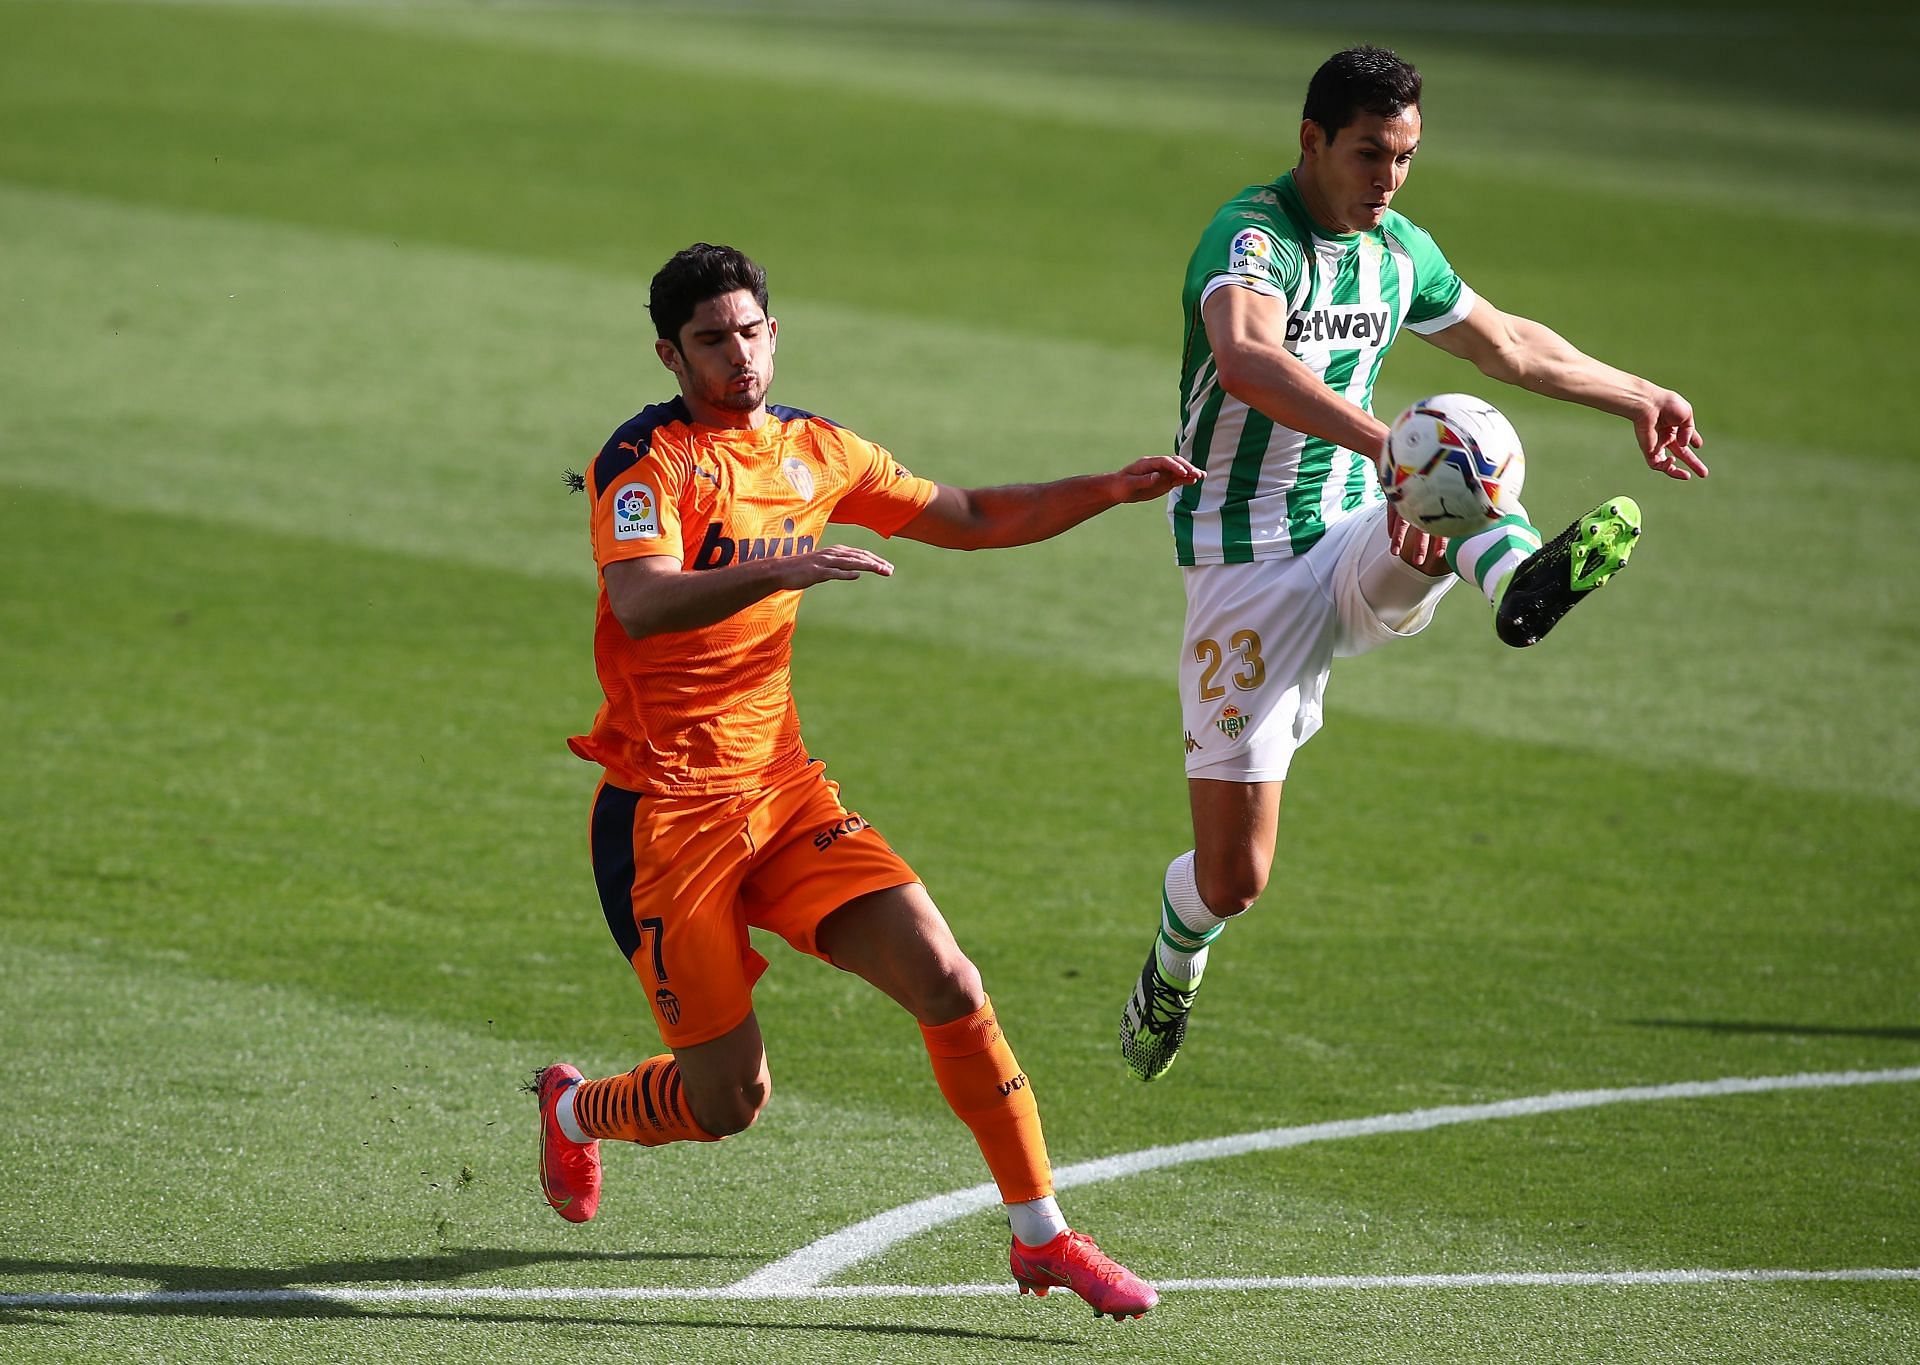 Betis vs valencia real ᐉ Real